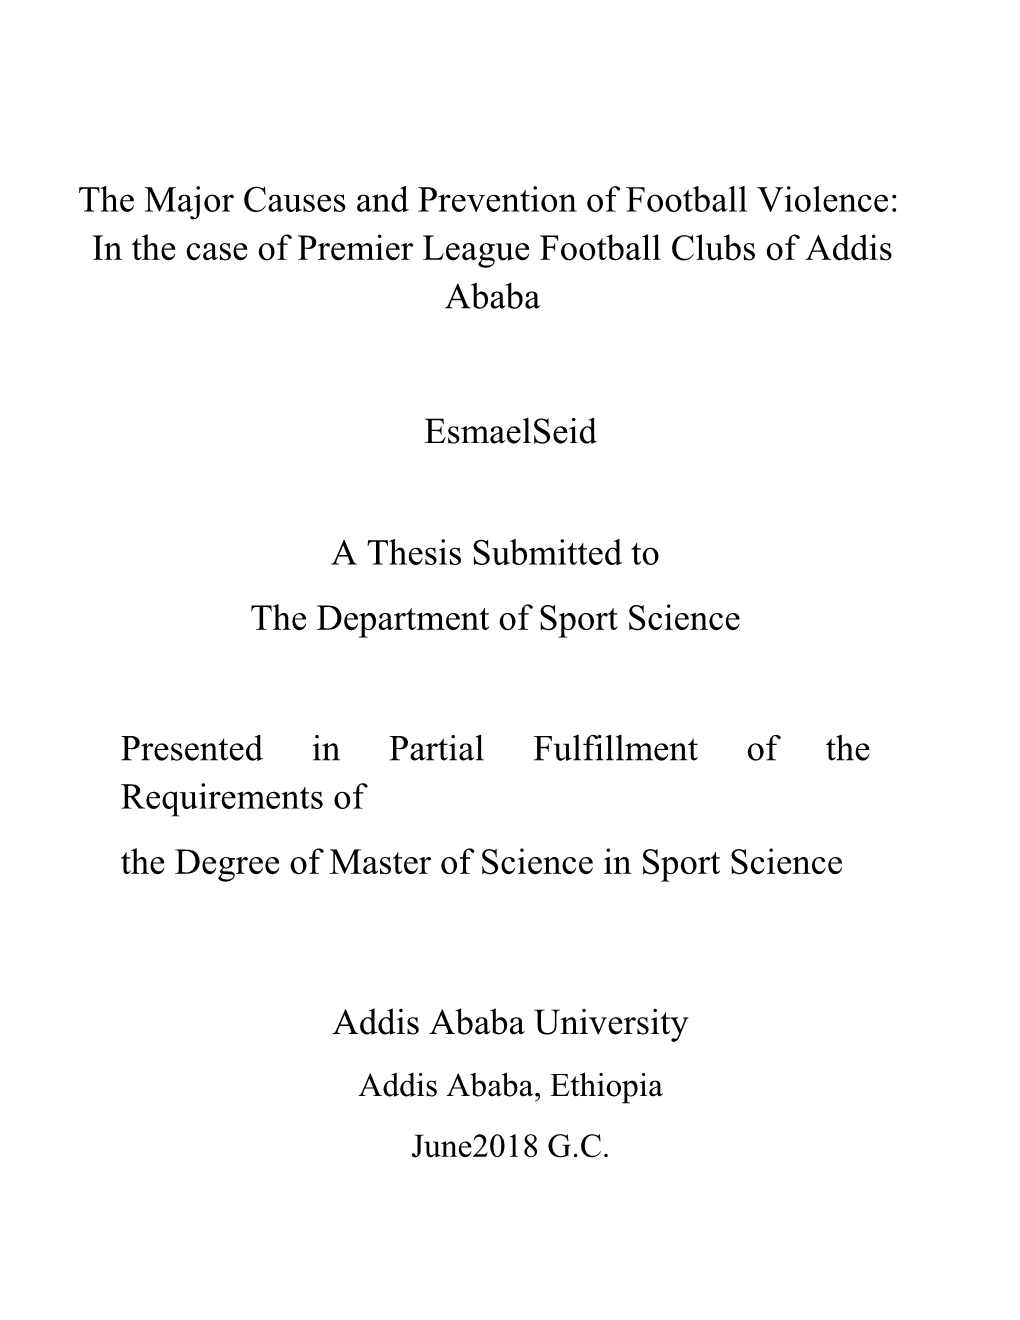 The Major Causes and Prevention of Football Violence: in the Case of Premier League Football Clubs of Addis Ababa